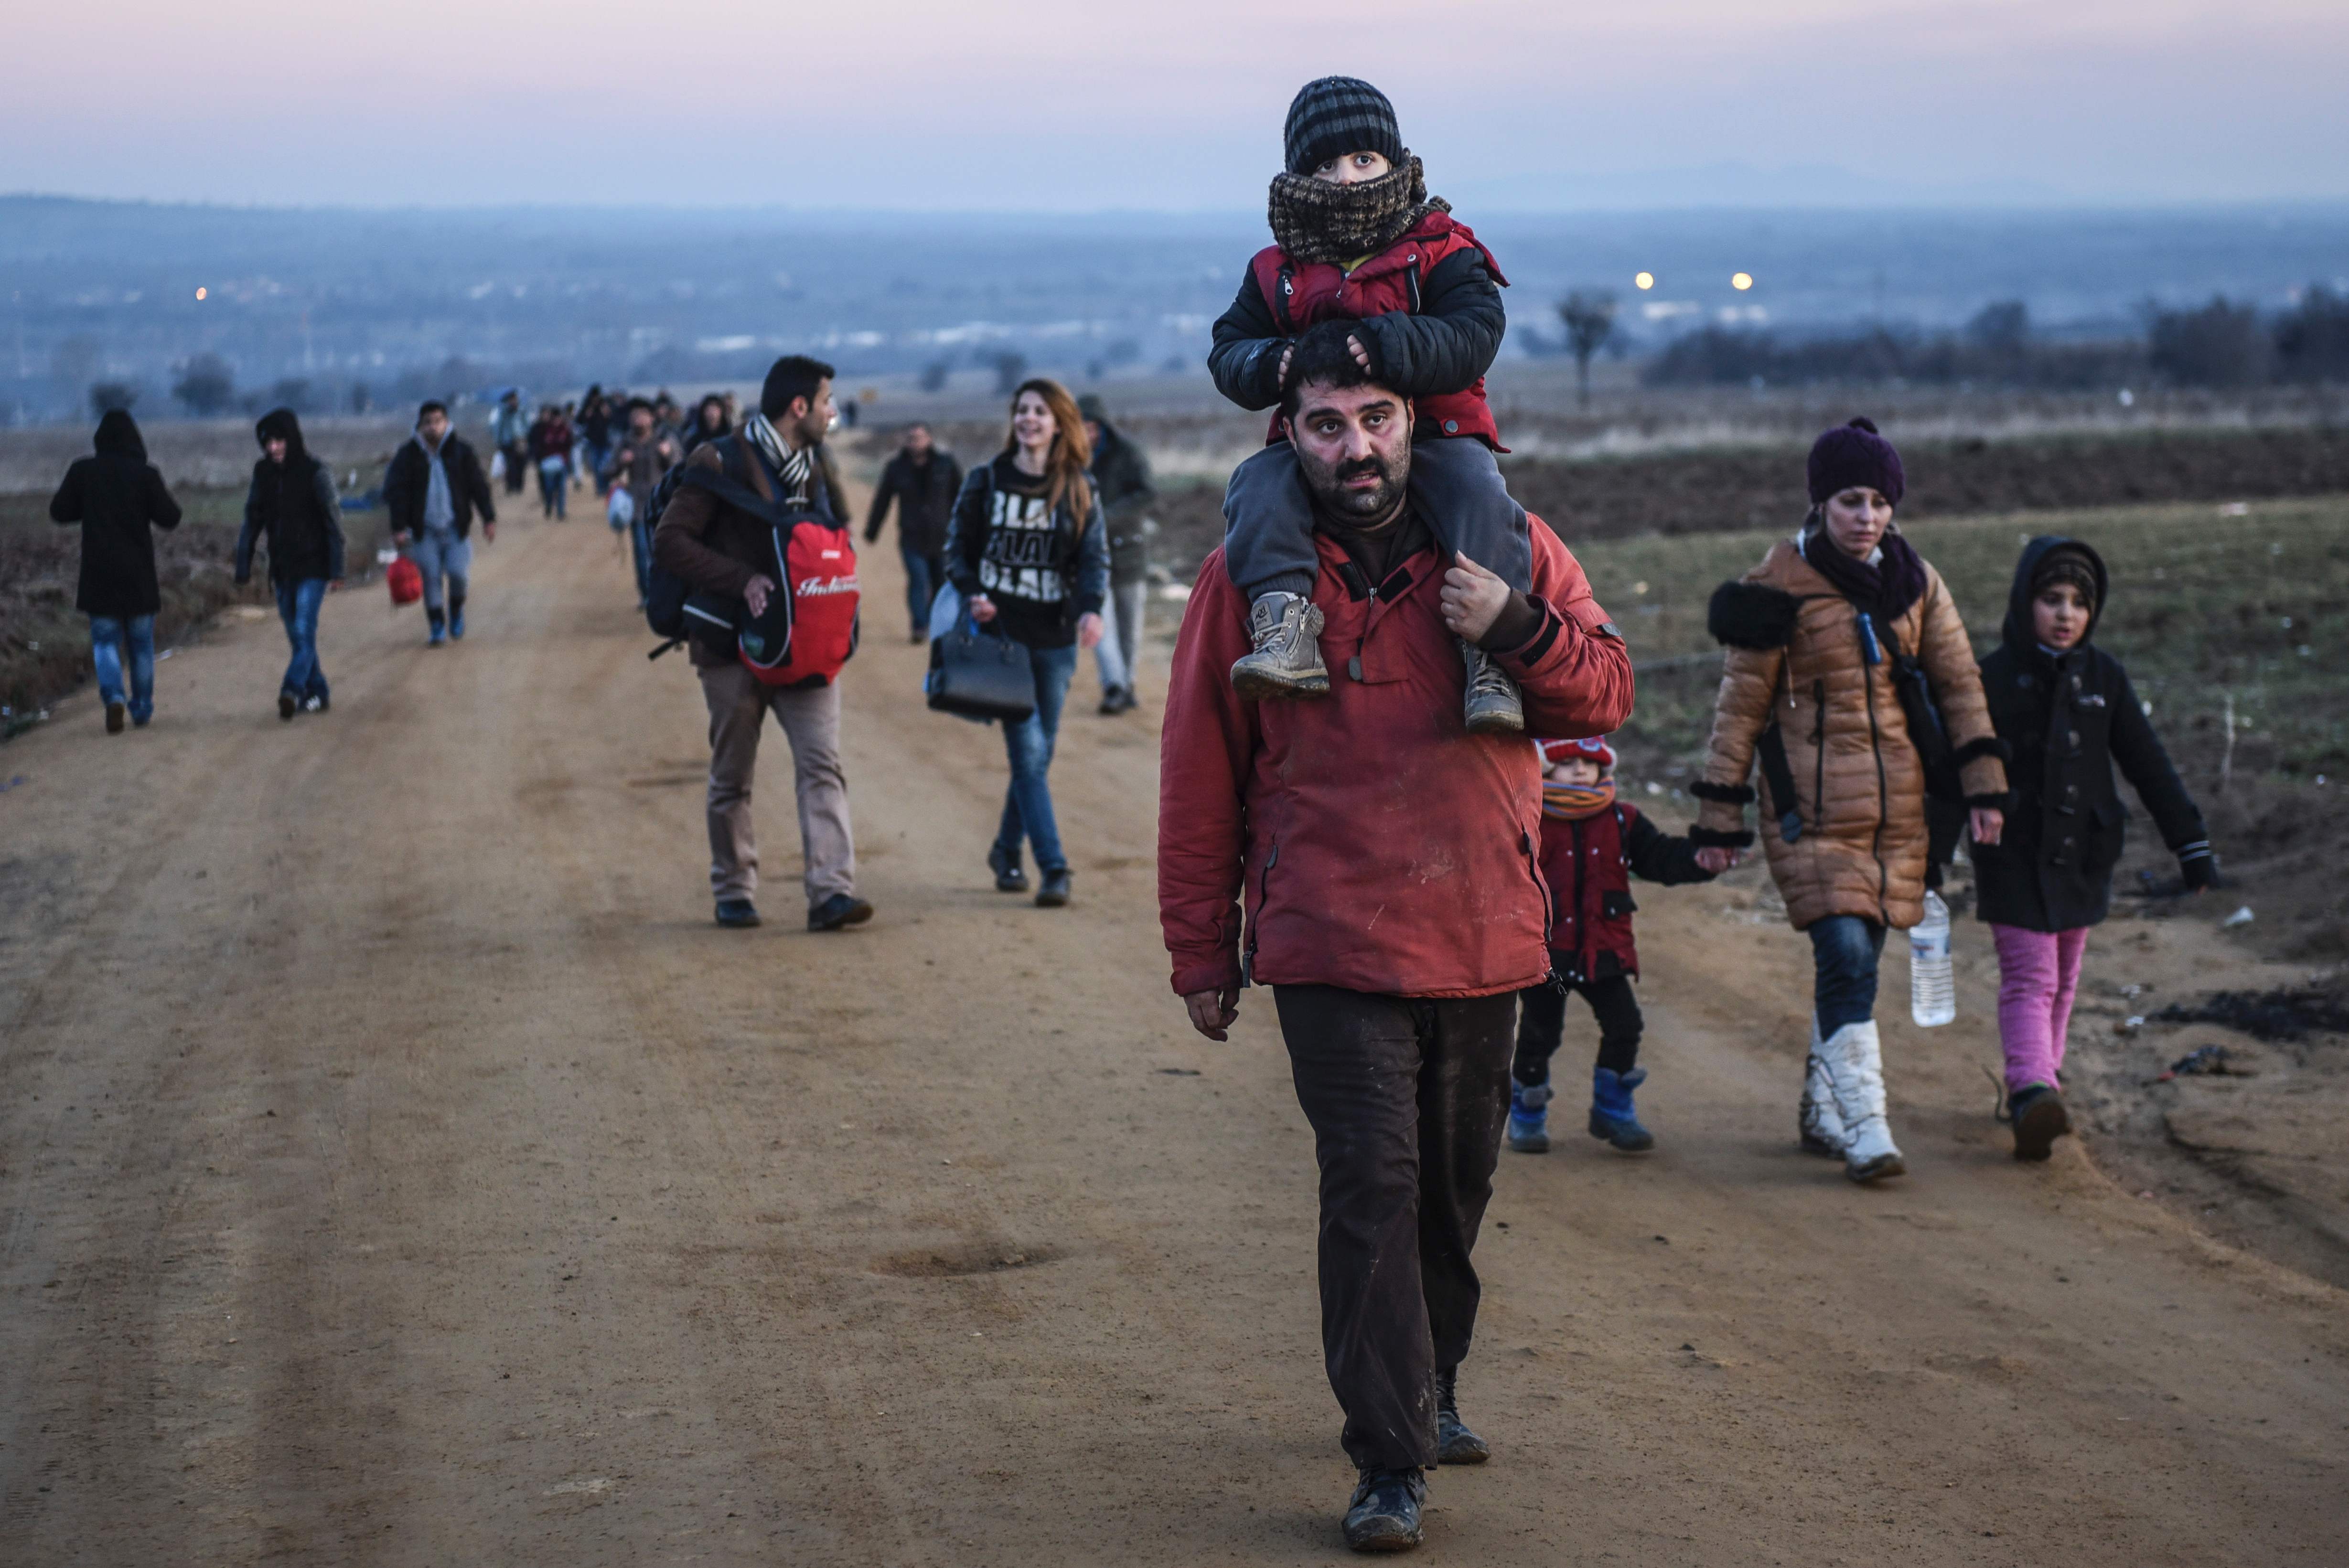 Migrants and refugees walk on a road after crossing the Macedonian border into Serbia, near the village of Miratovac, on January 8, 2016. More than a million refugees and migrants arrived in Europe in 2015 in the worst crisis of its kind to face the continent since World War II. / AFP / ARMEND NIMANI